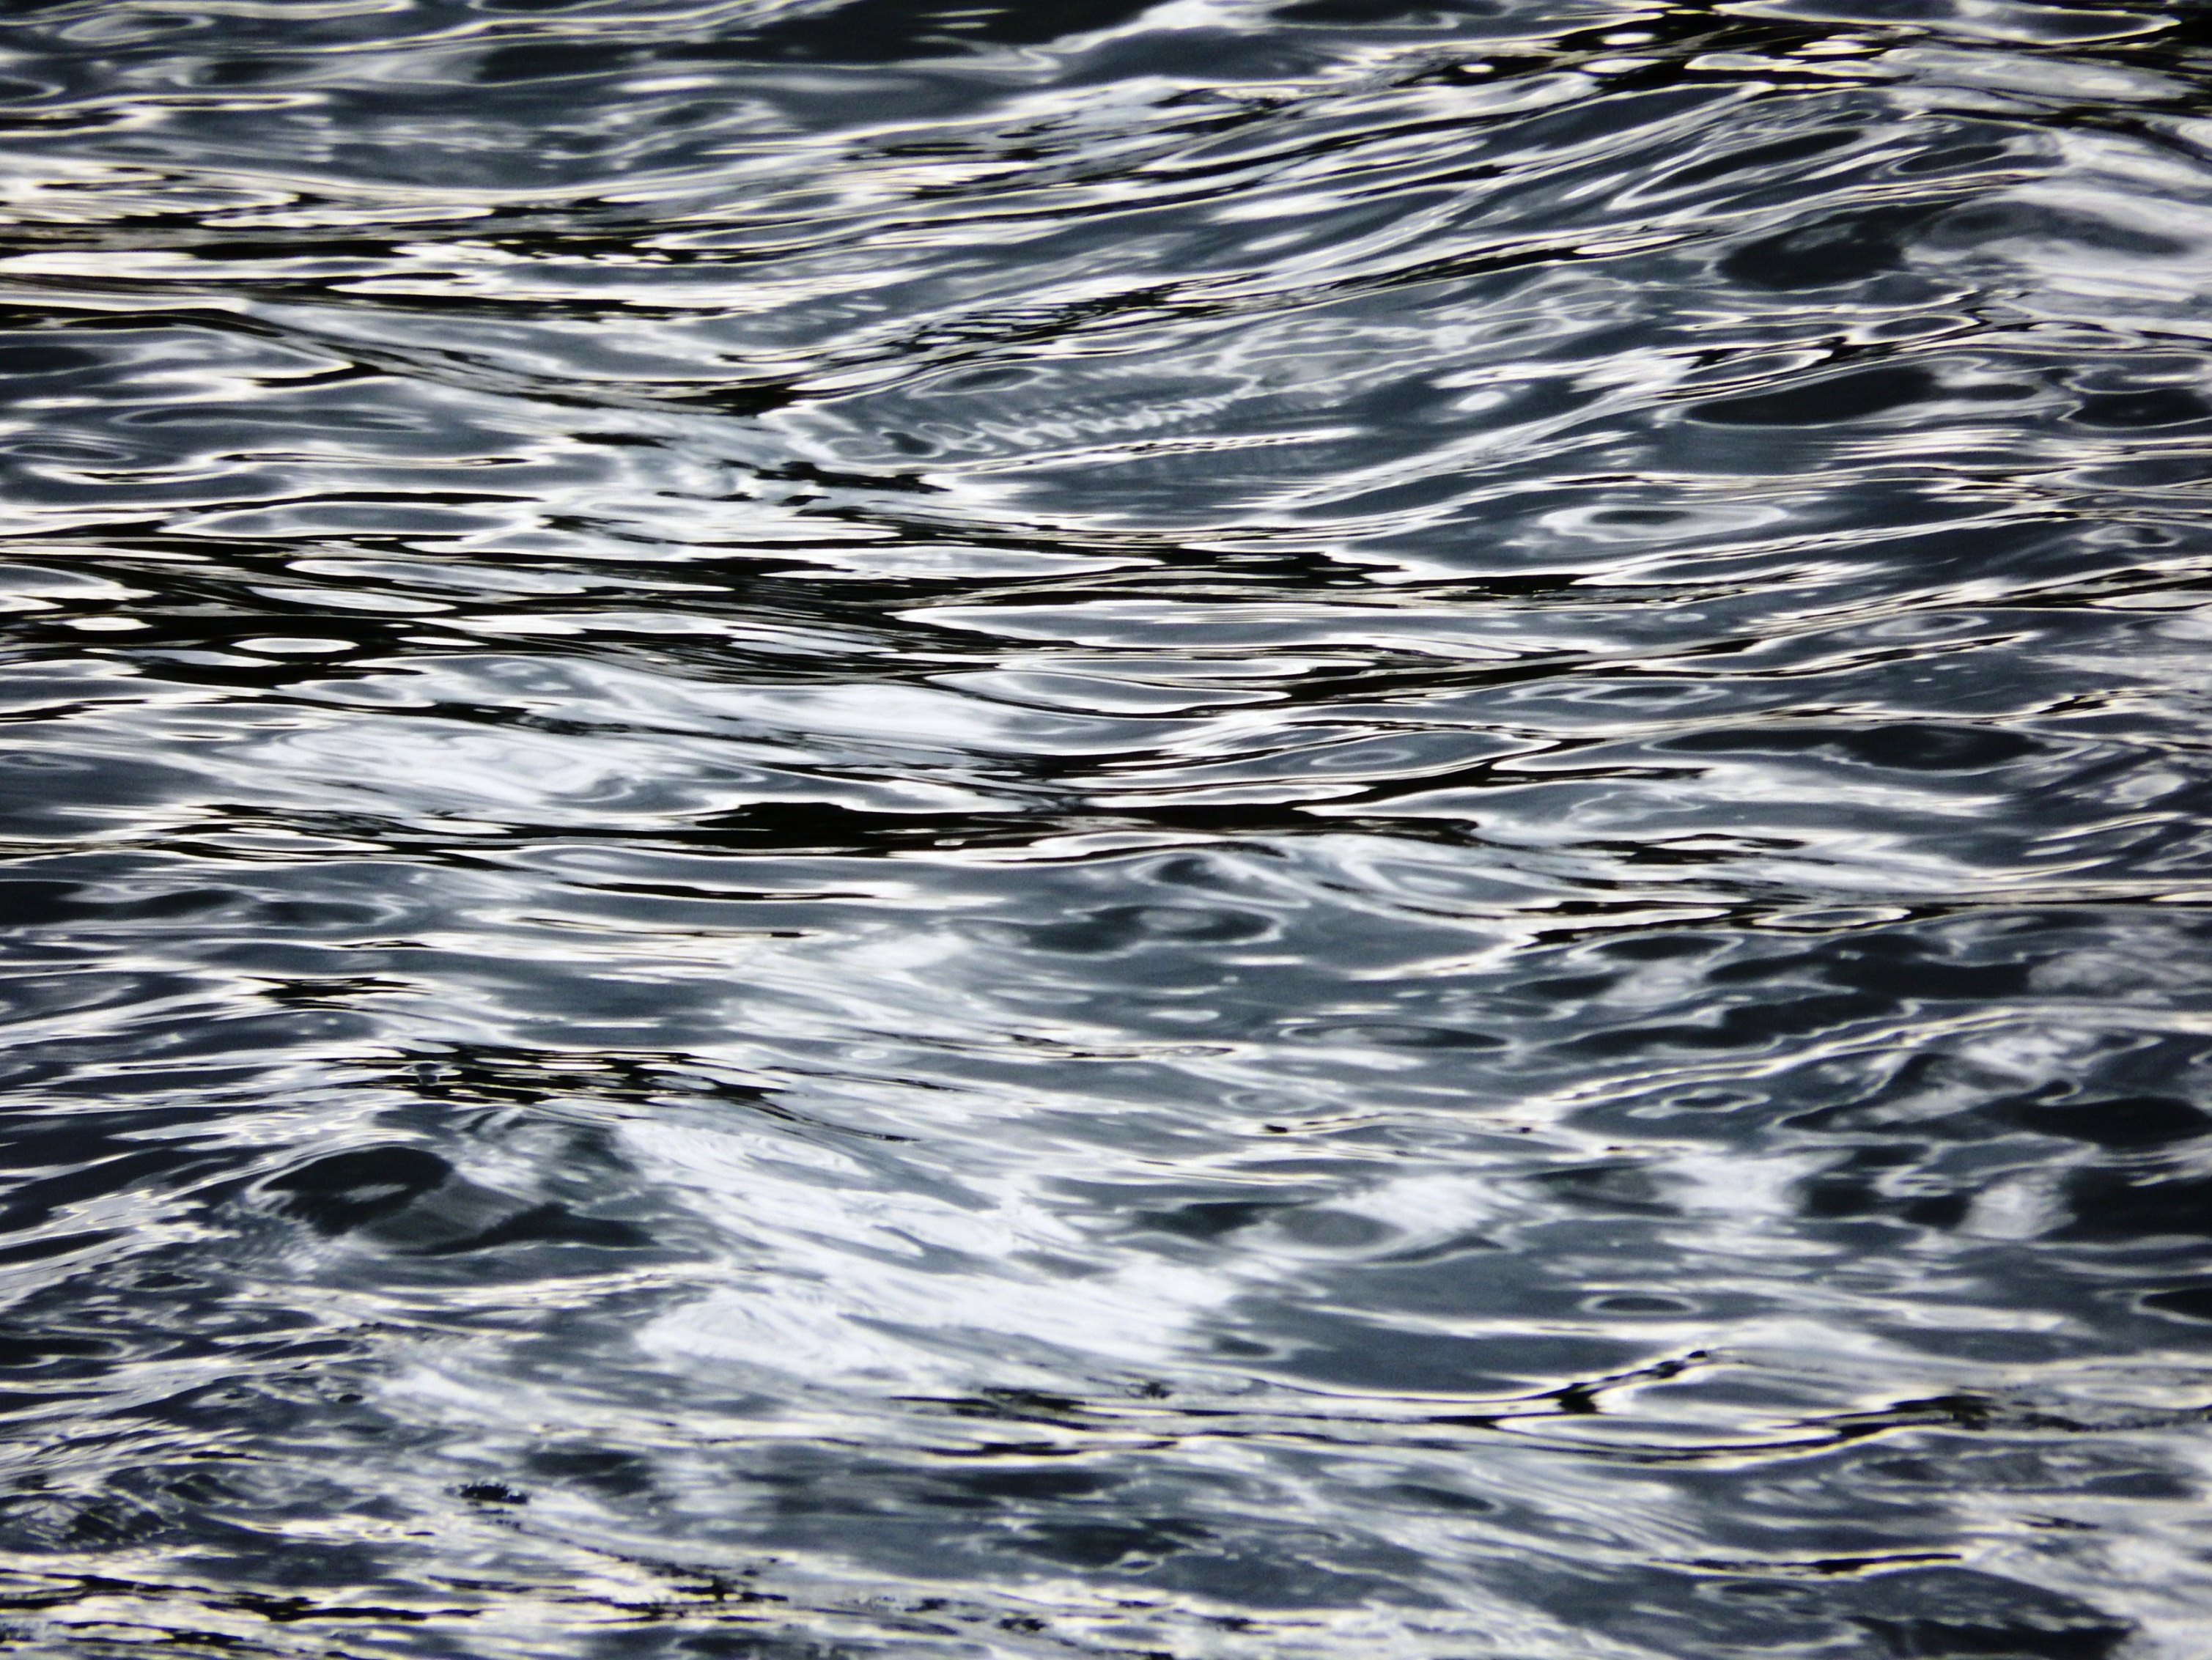 Ocean ripples and waves texture photo